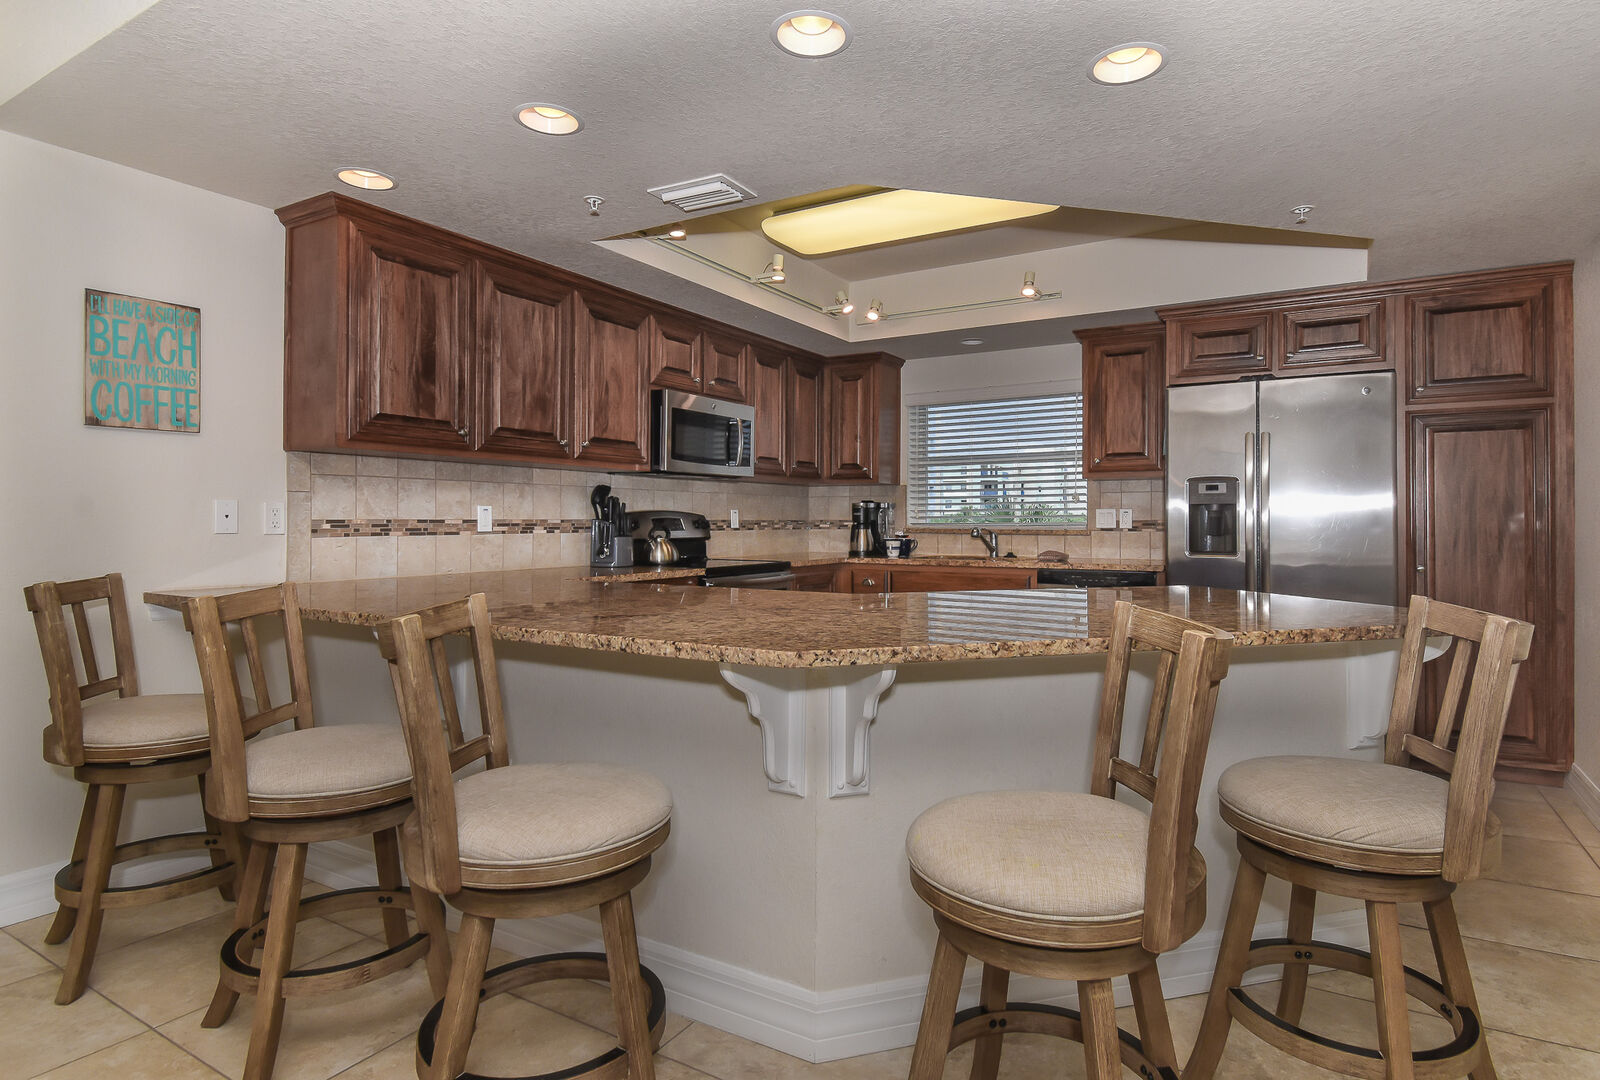 large kitchen and bar stools seating an additional 5